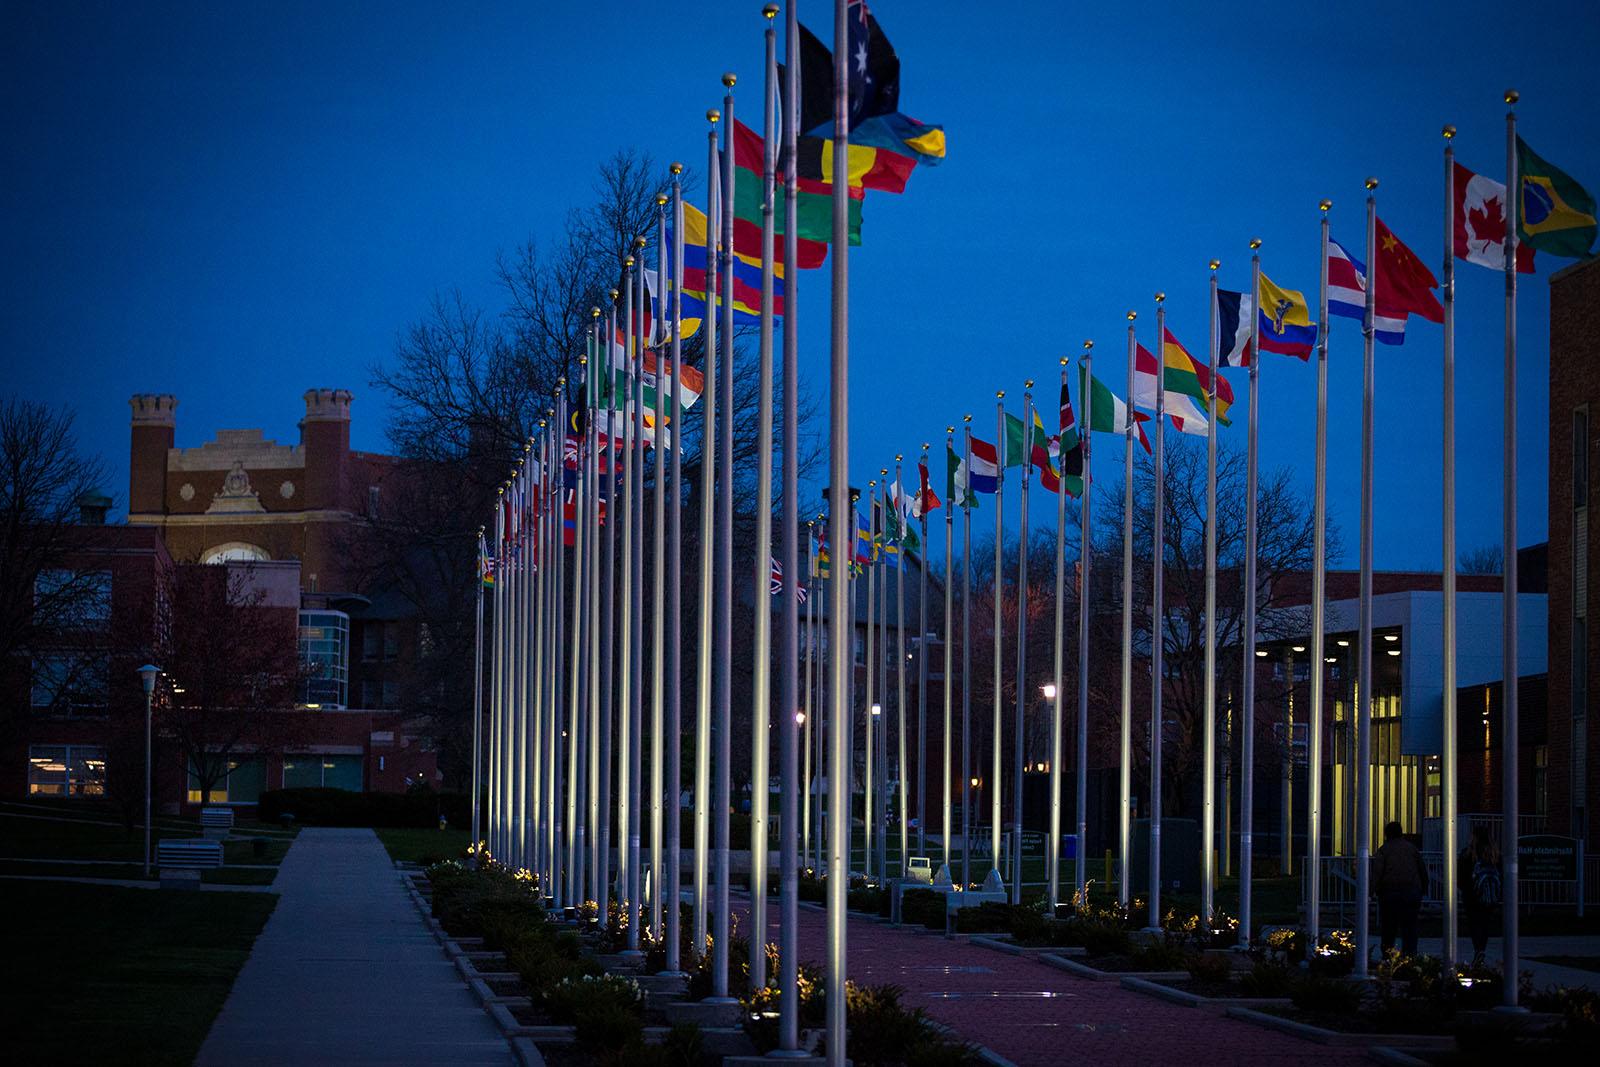 The 乔伊斯 and Harvey White 国际广场, modeled after the United Nations flag plaza in New York City, is a symbol of Northwest's commitment to international understanding and cooperation.